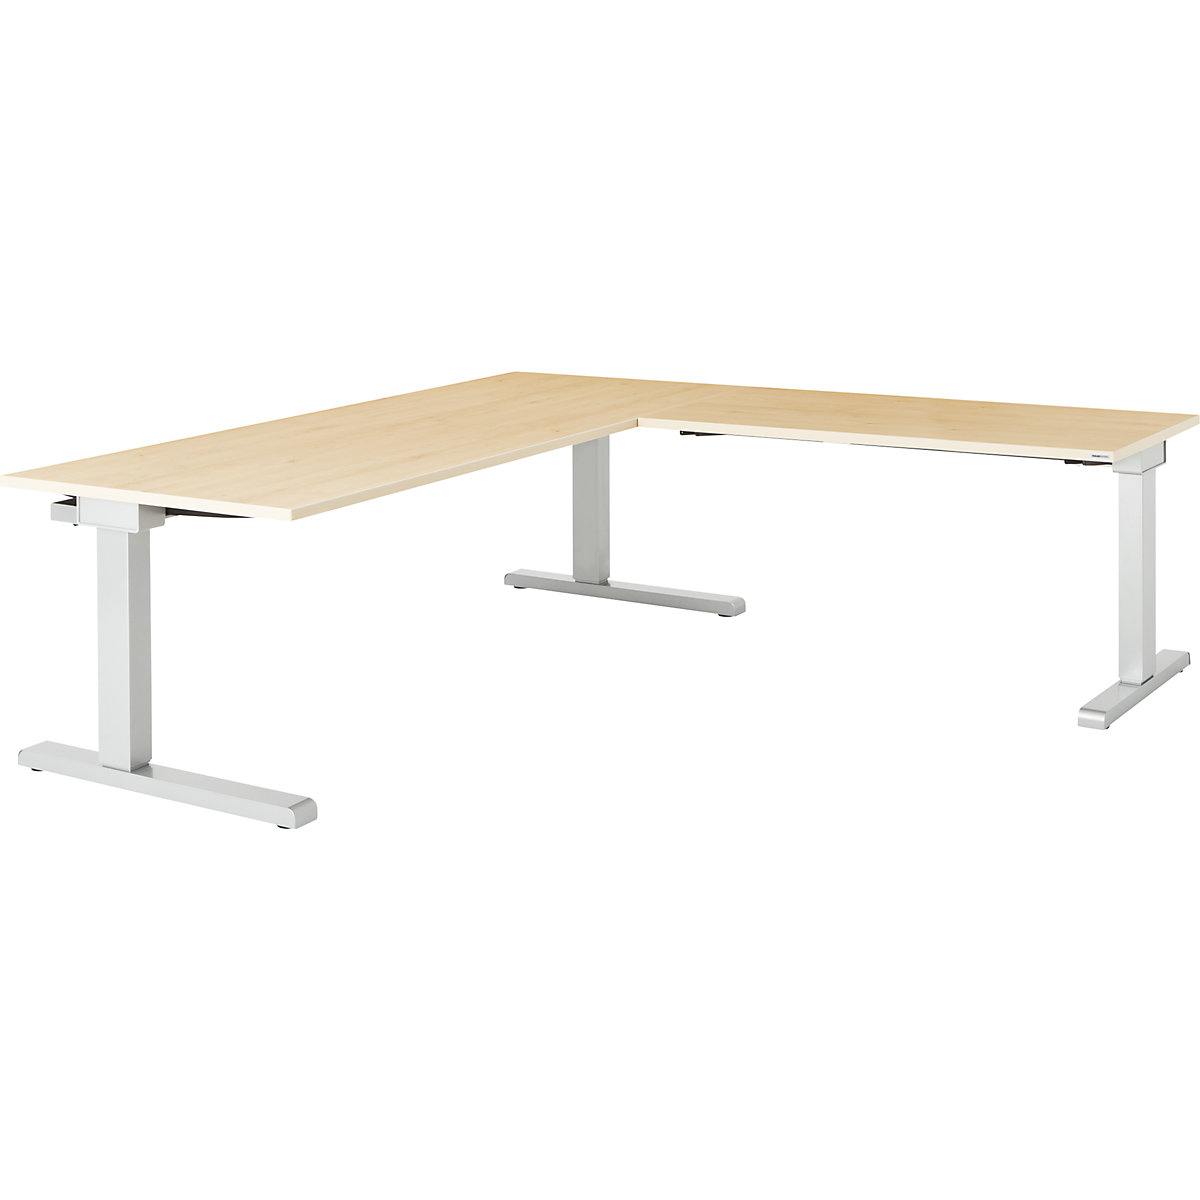 Desk, interlinked – mauser, WxD 1800 x 800 mm, angled extension on right (width 1200 mm), maple finish top, white aluminium frame-3